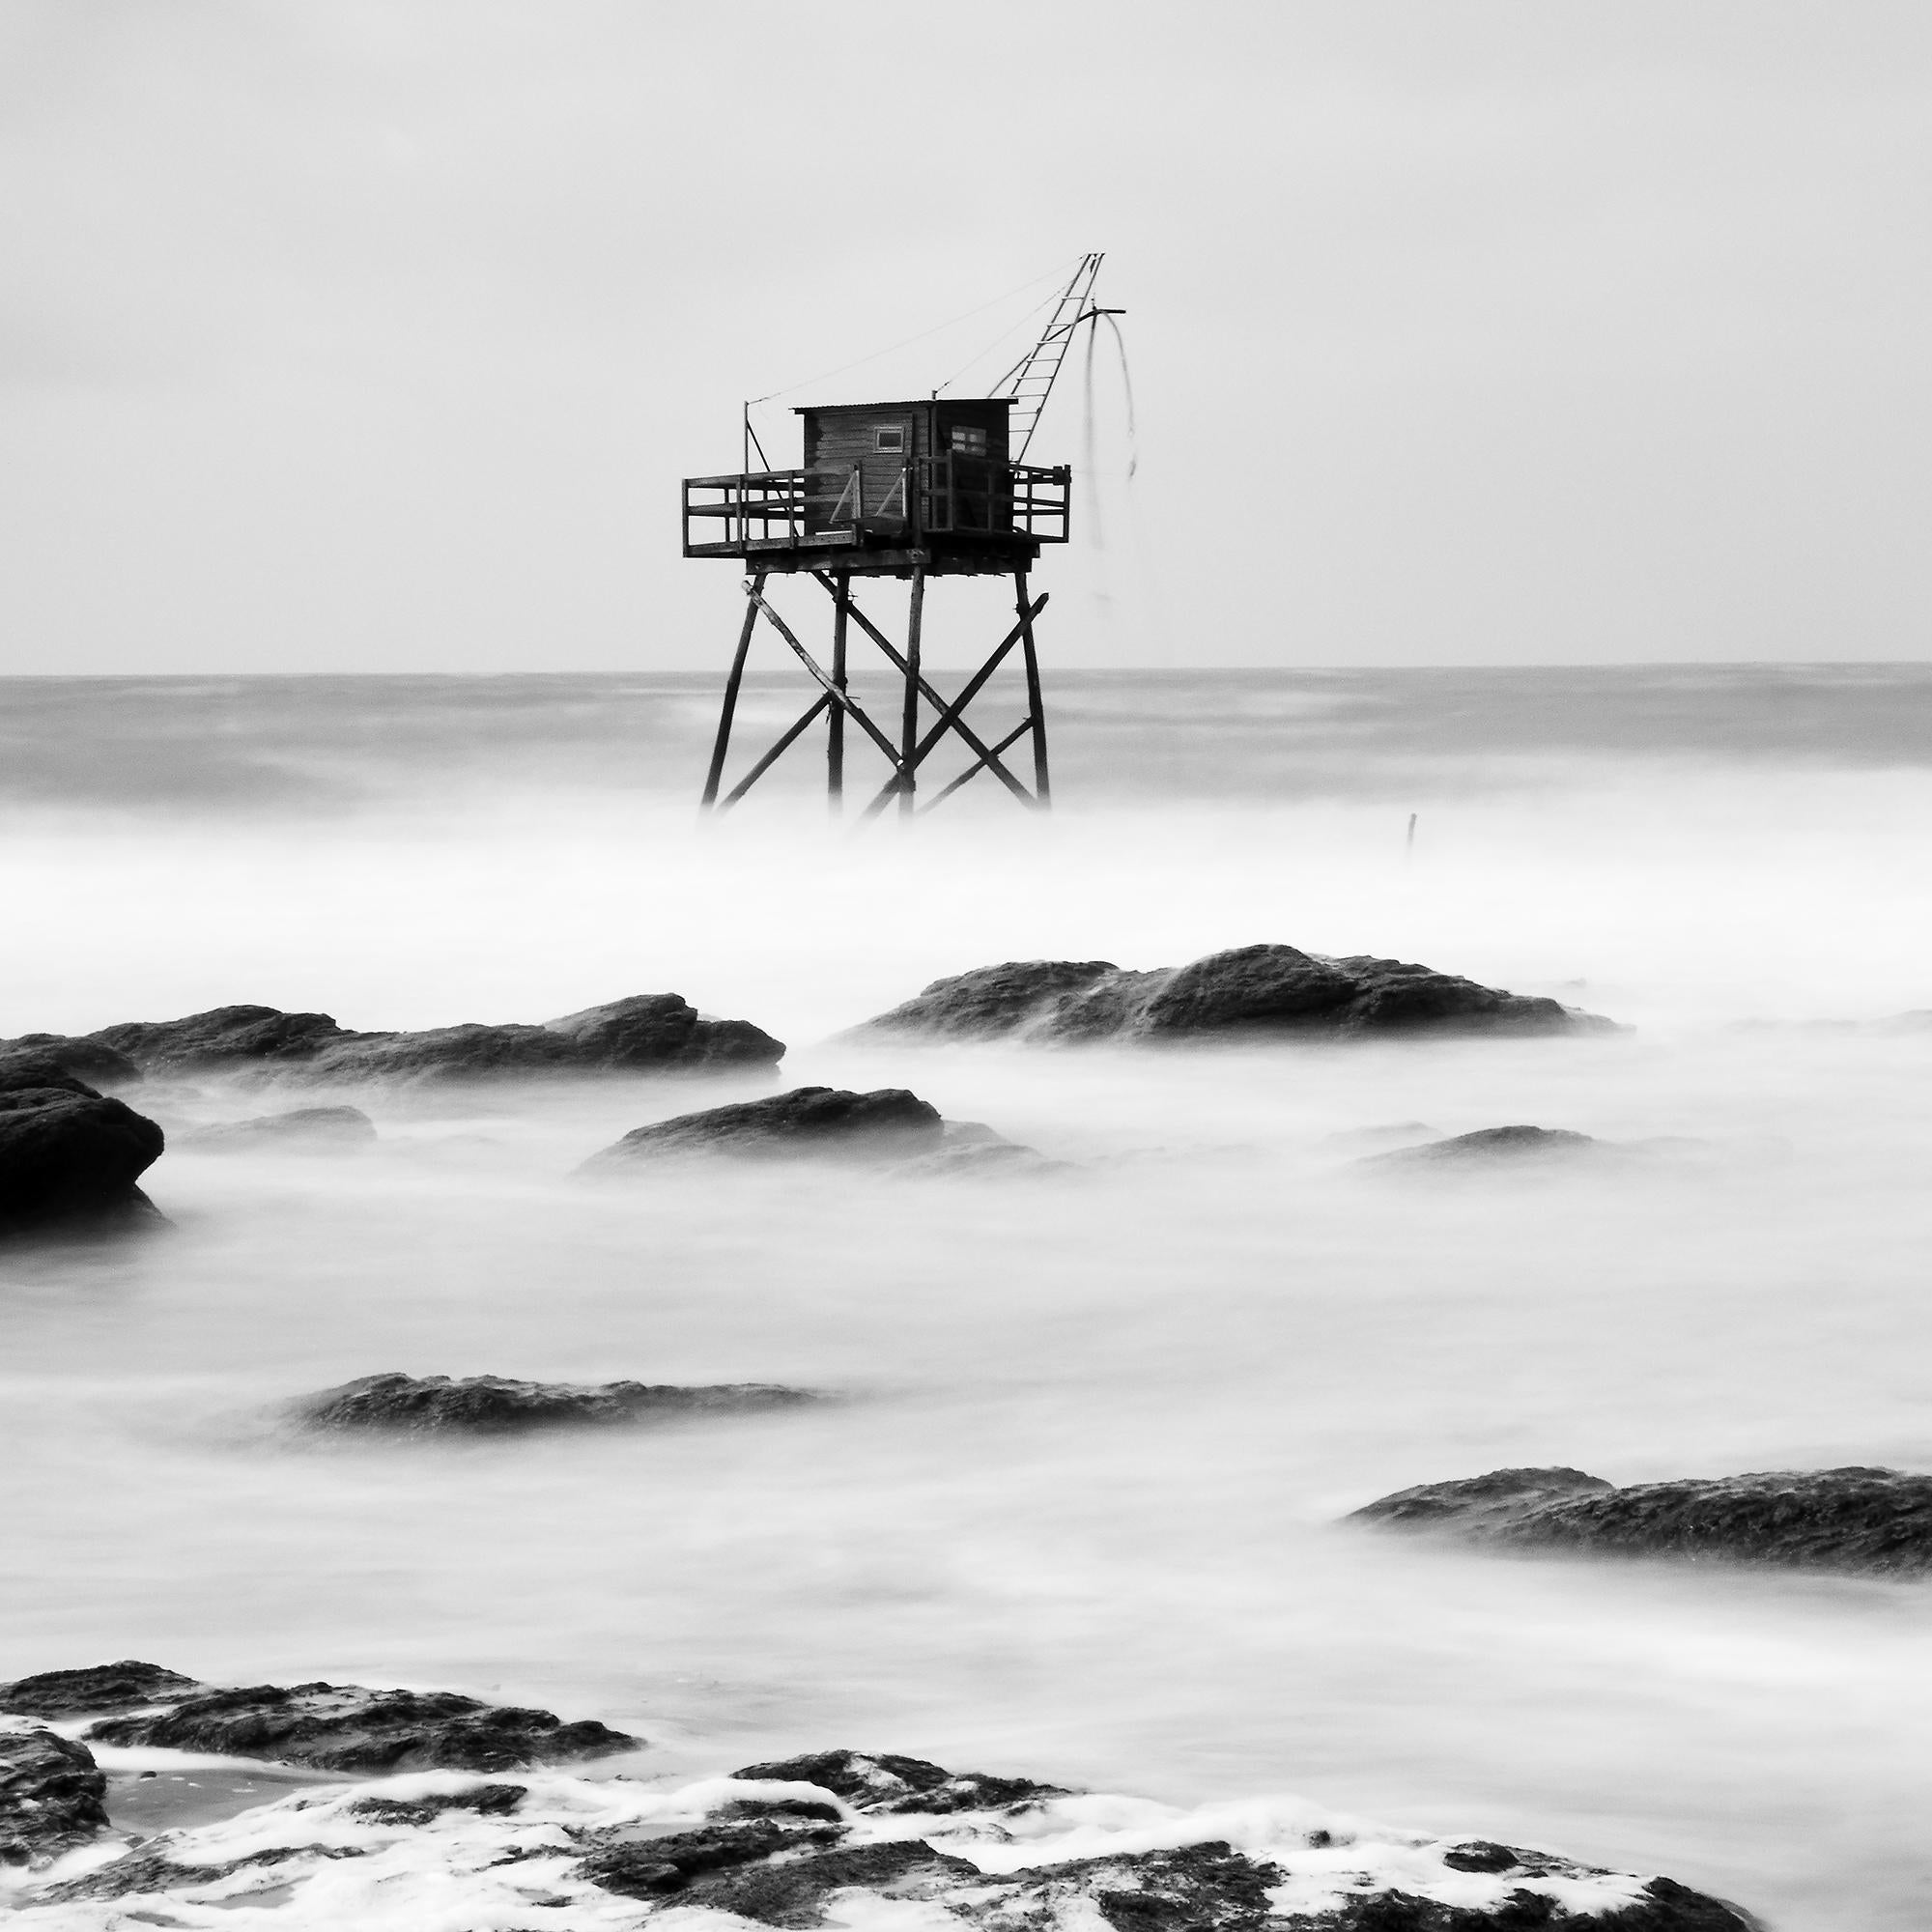 Fishing Hut on Stilts, coast of Atlantic Ocean, black and white waterscape For Sale 4